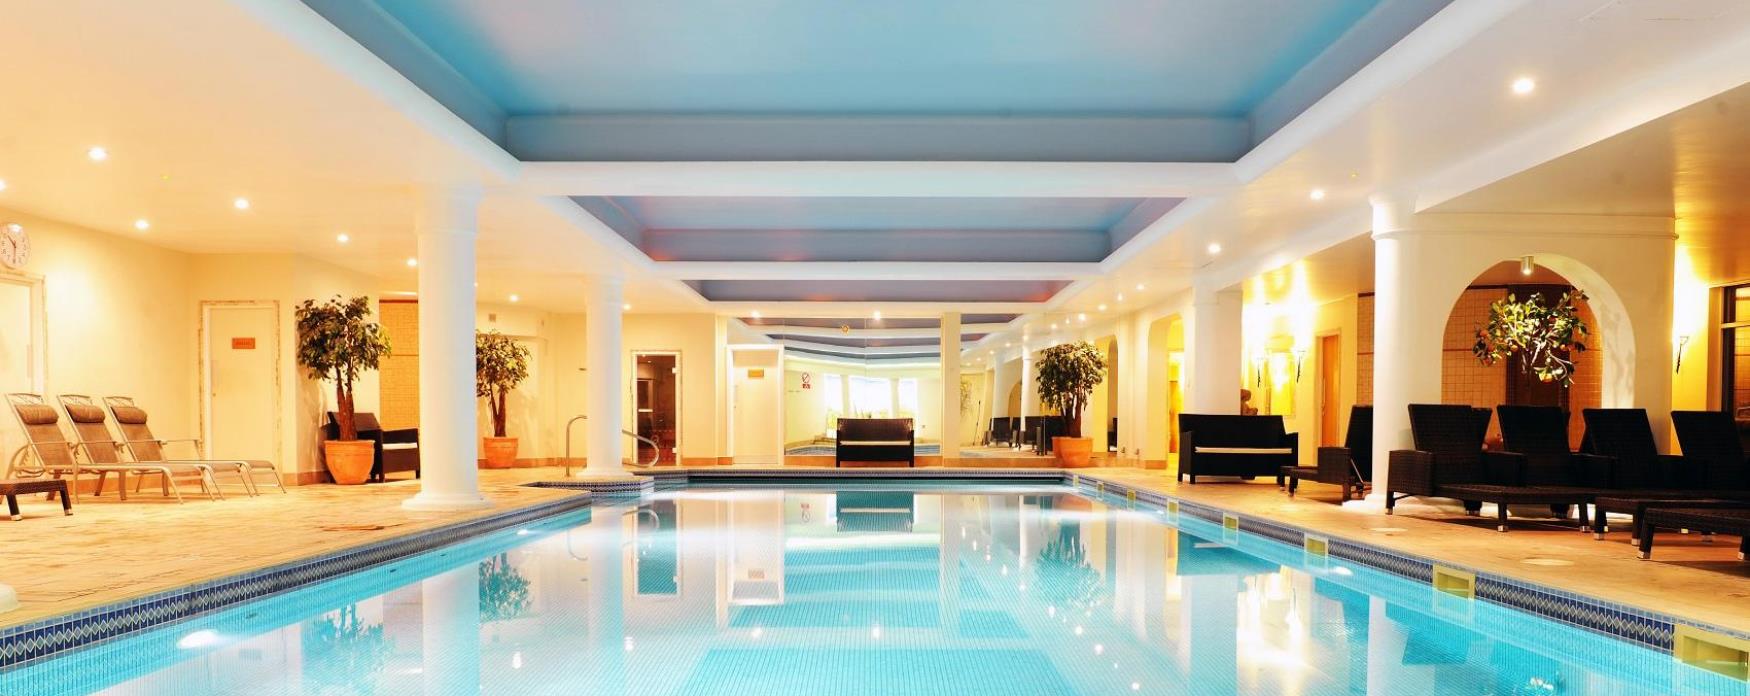 The Swimming pool at Stoke By Nayland Hotel and Spa